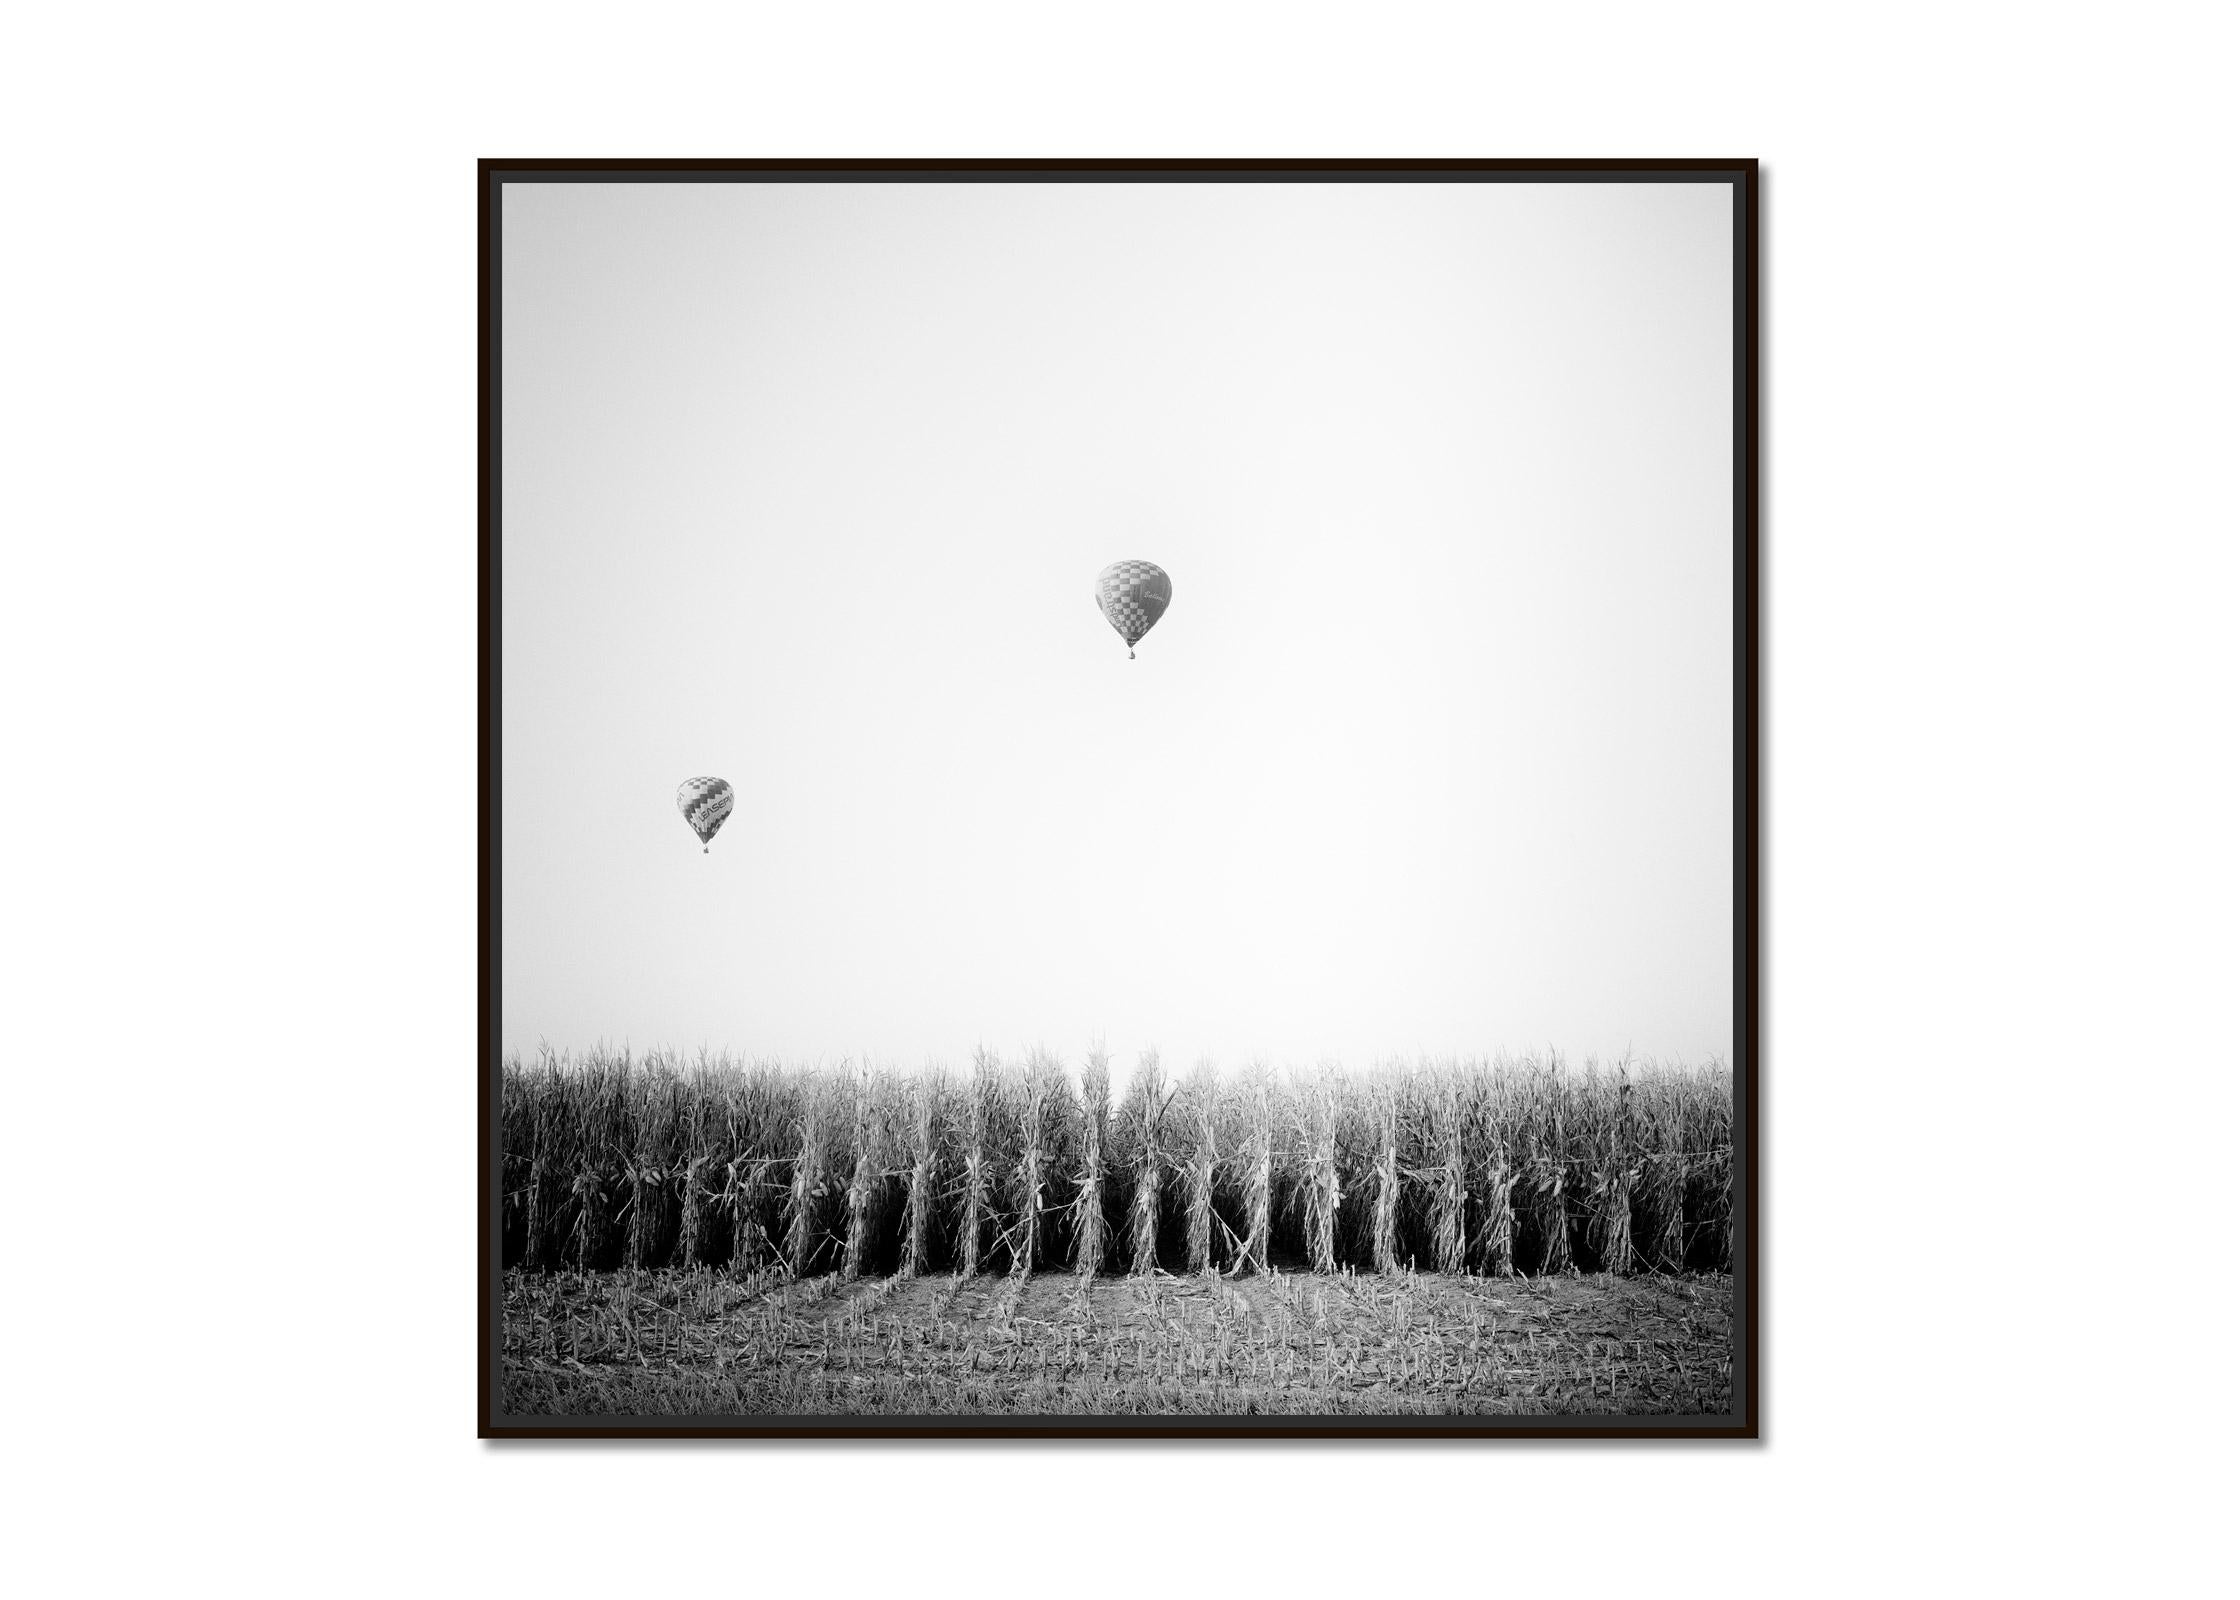 Hot Air Balloon, Cornfield, Championship, black and white landscape photo print - Photograph by Gerald Berghammer